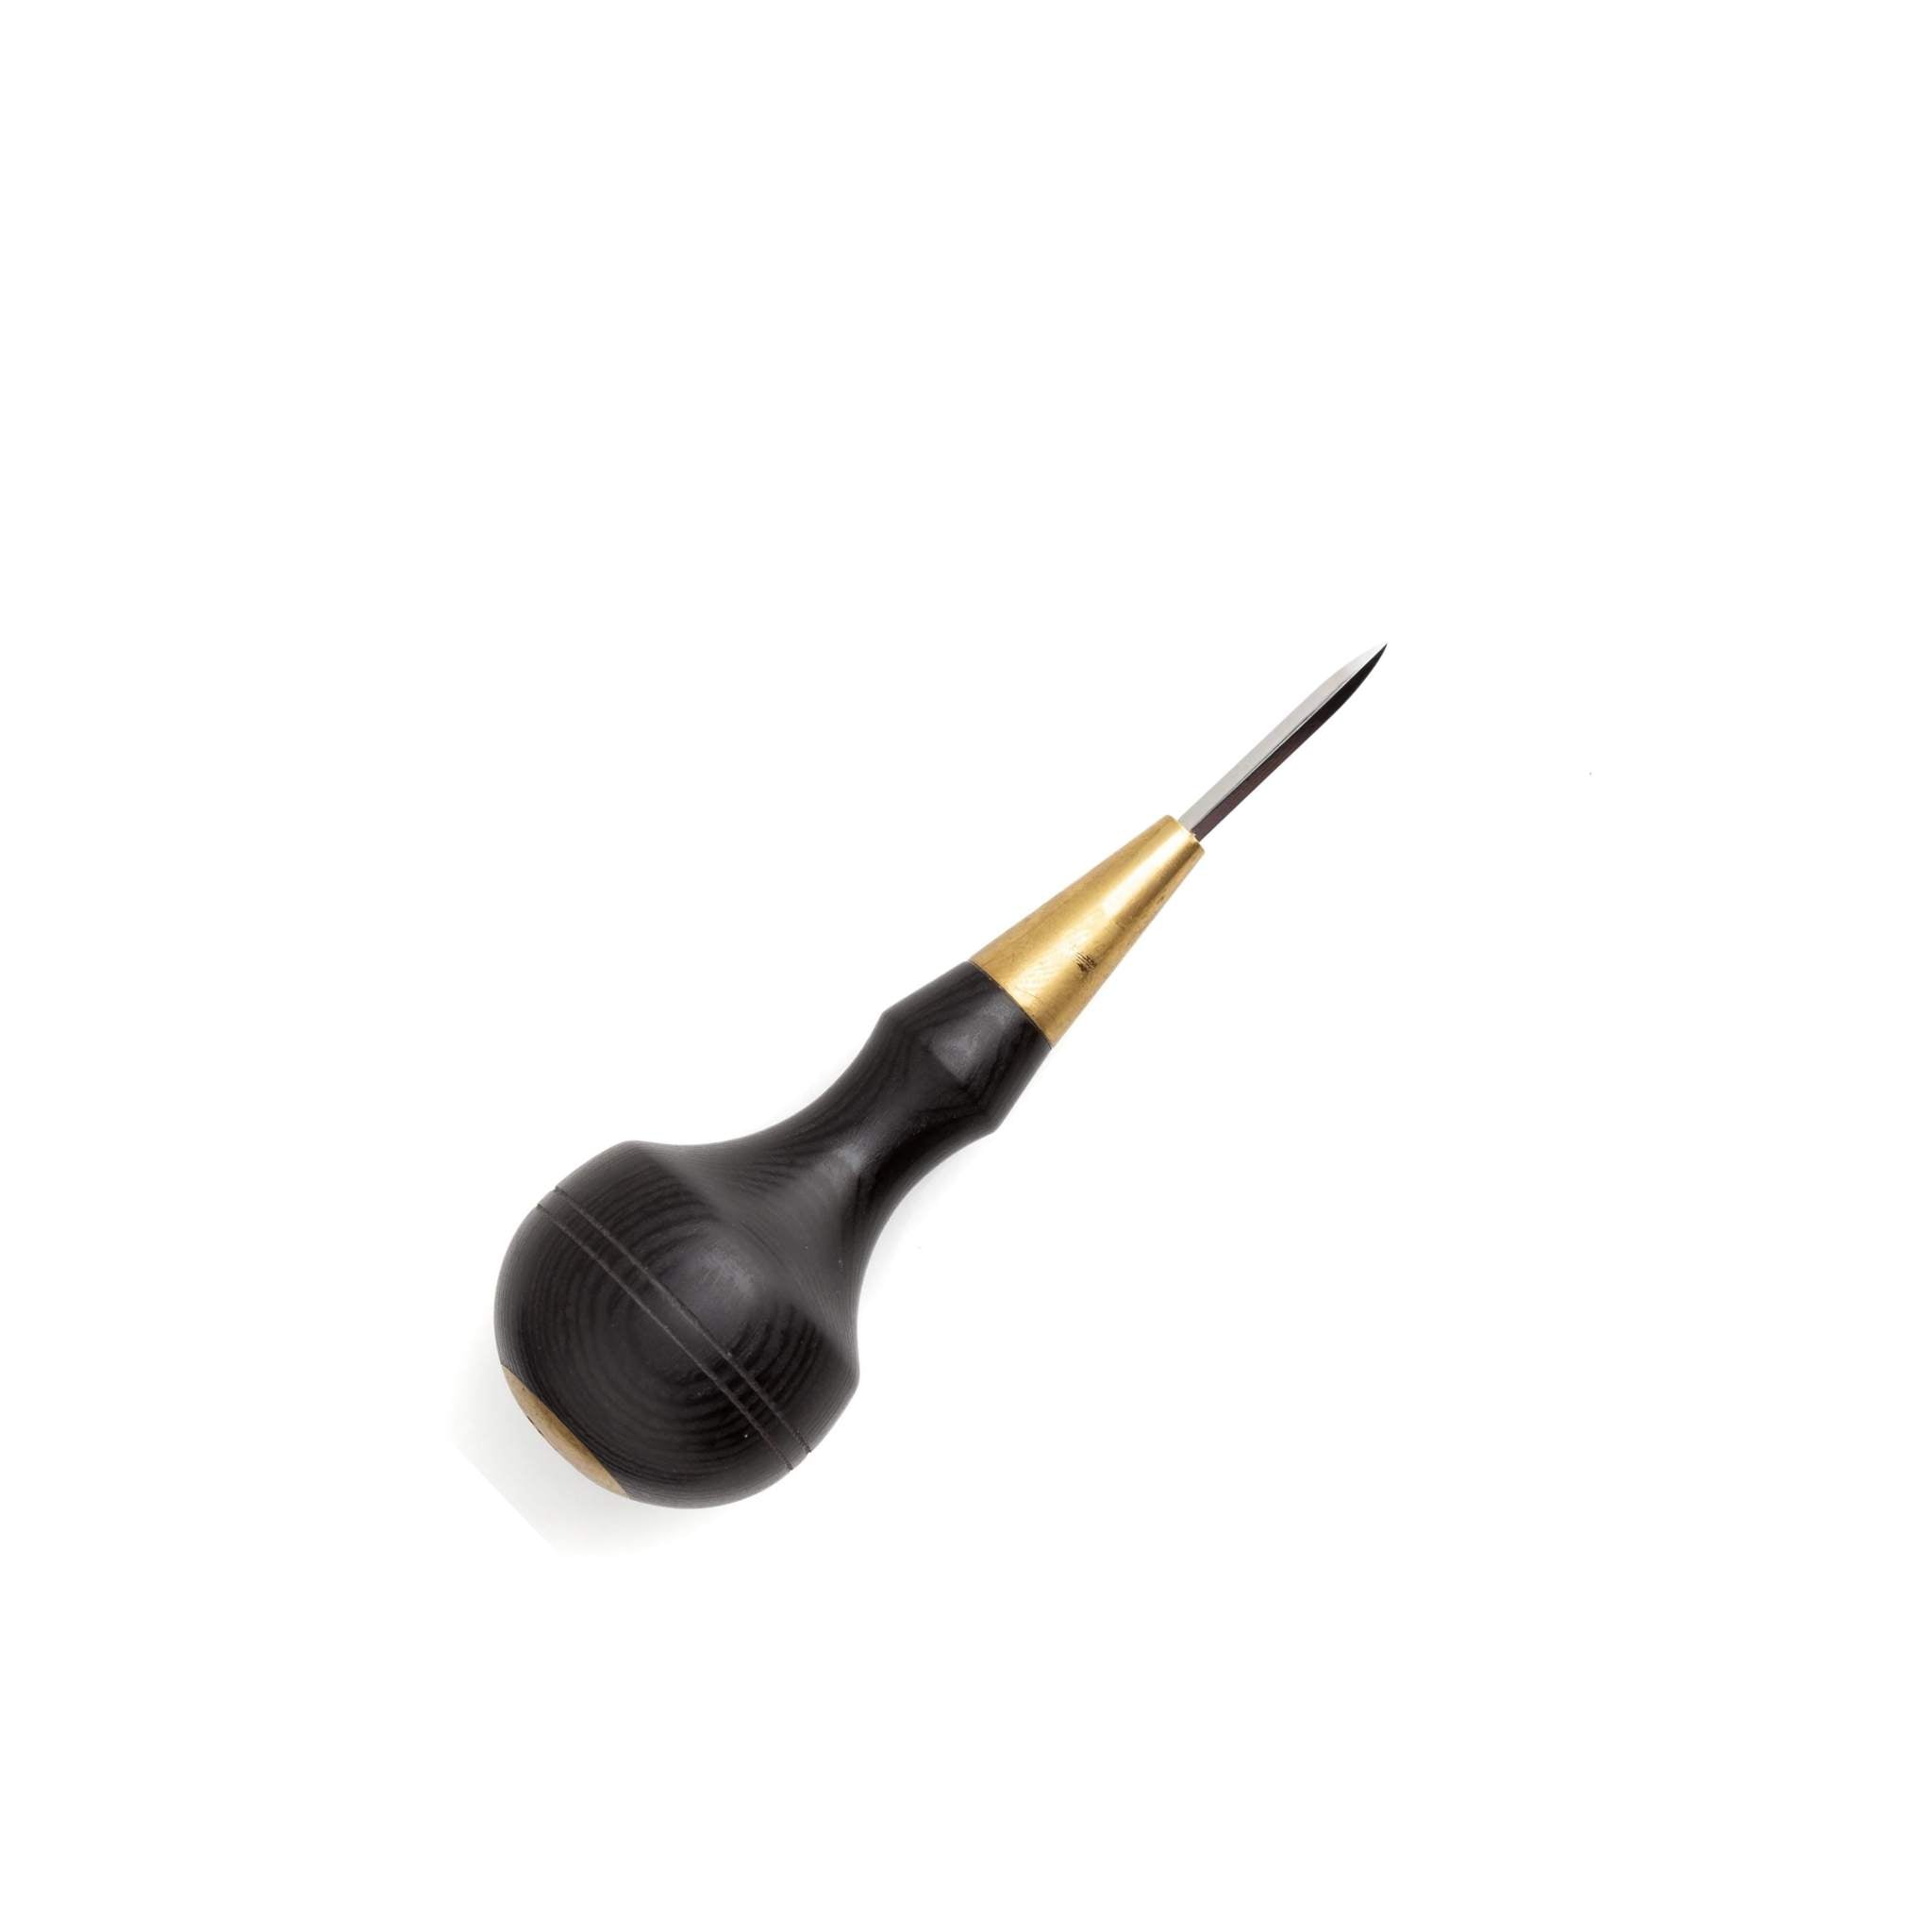 Diamond Stitching Awl - part of the beautifully made TandyPro range, with super sharp hardened steel blade for peircing leather